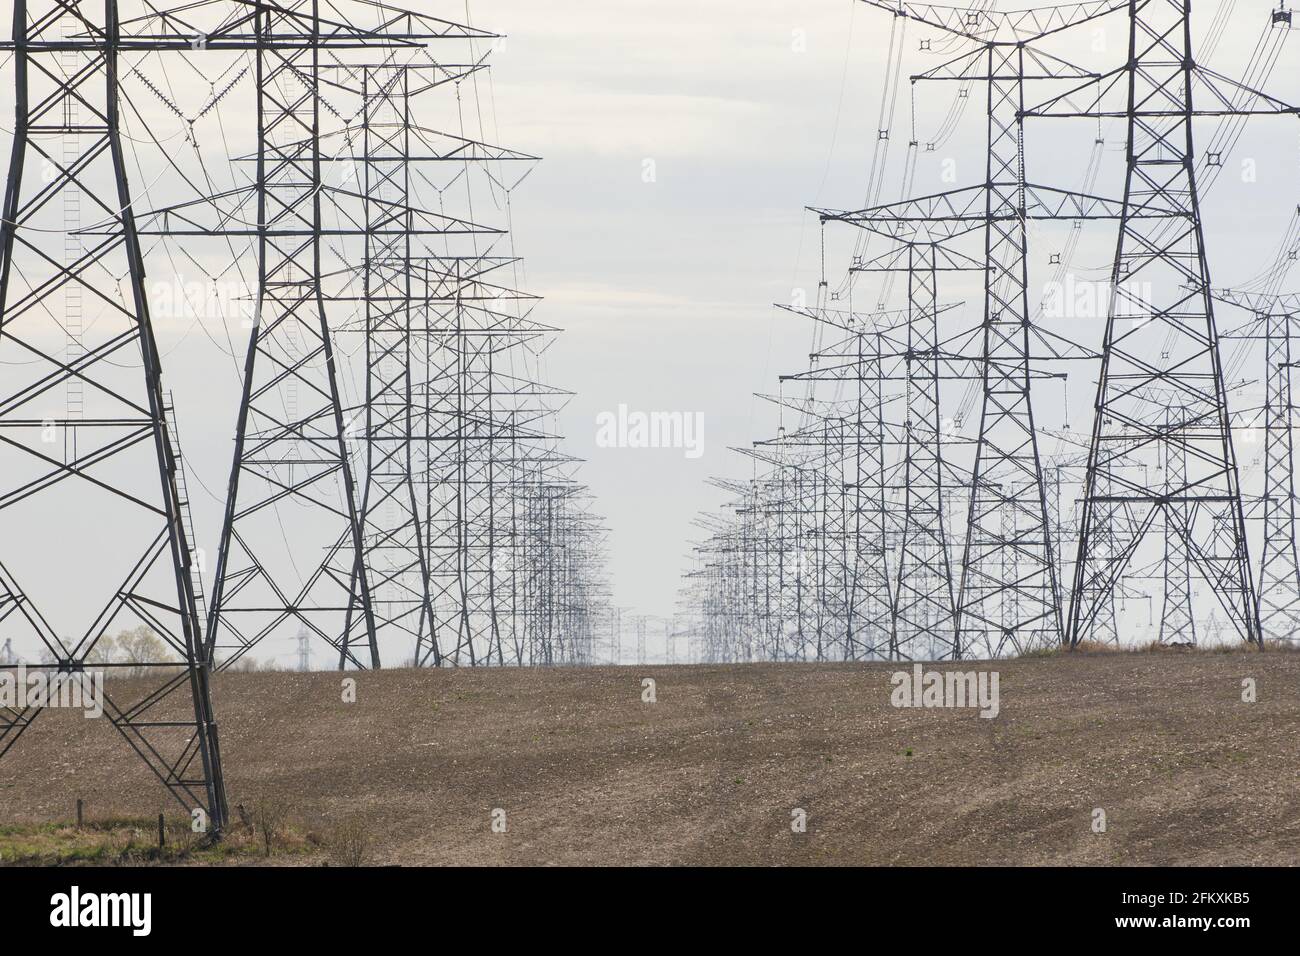 These parrallel power lines run east of Toronto. Stock Photo